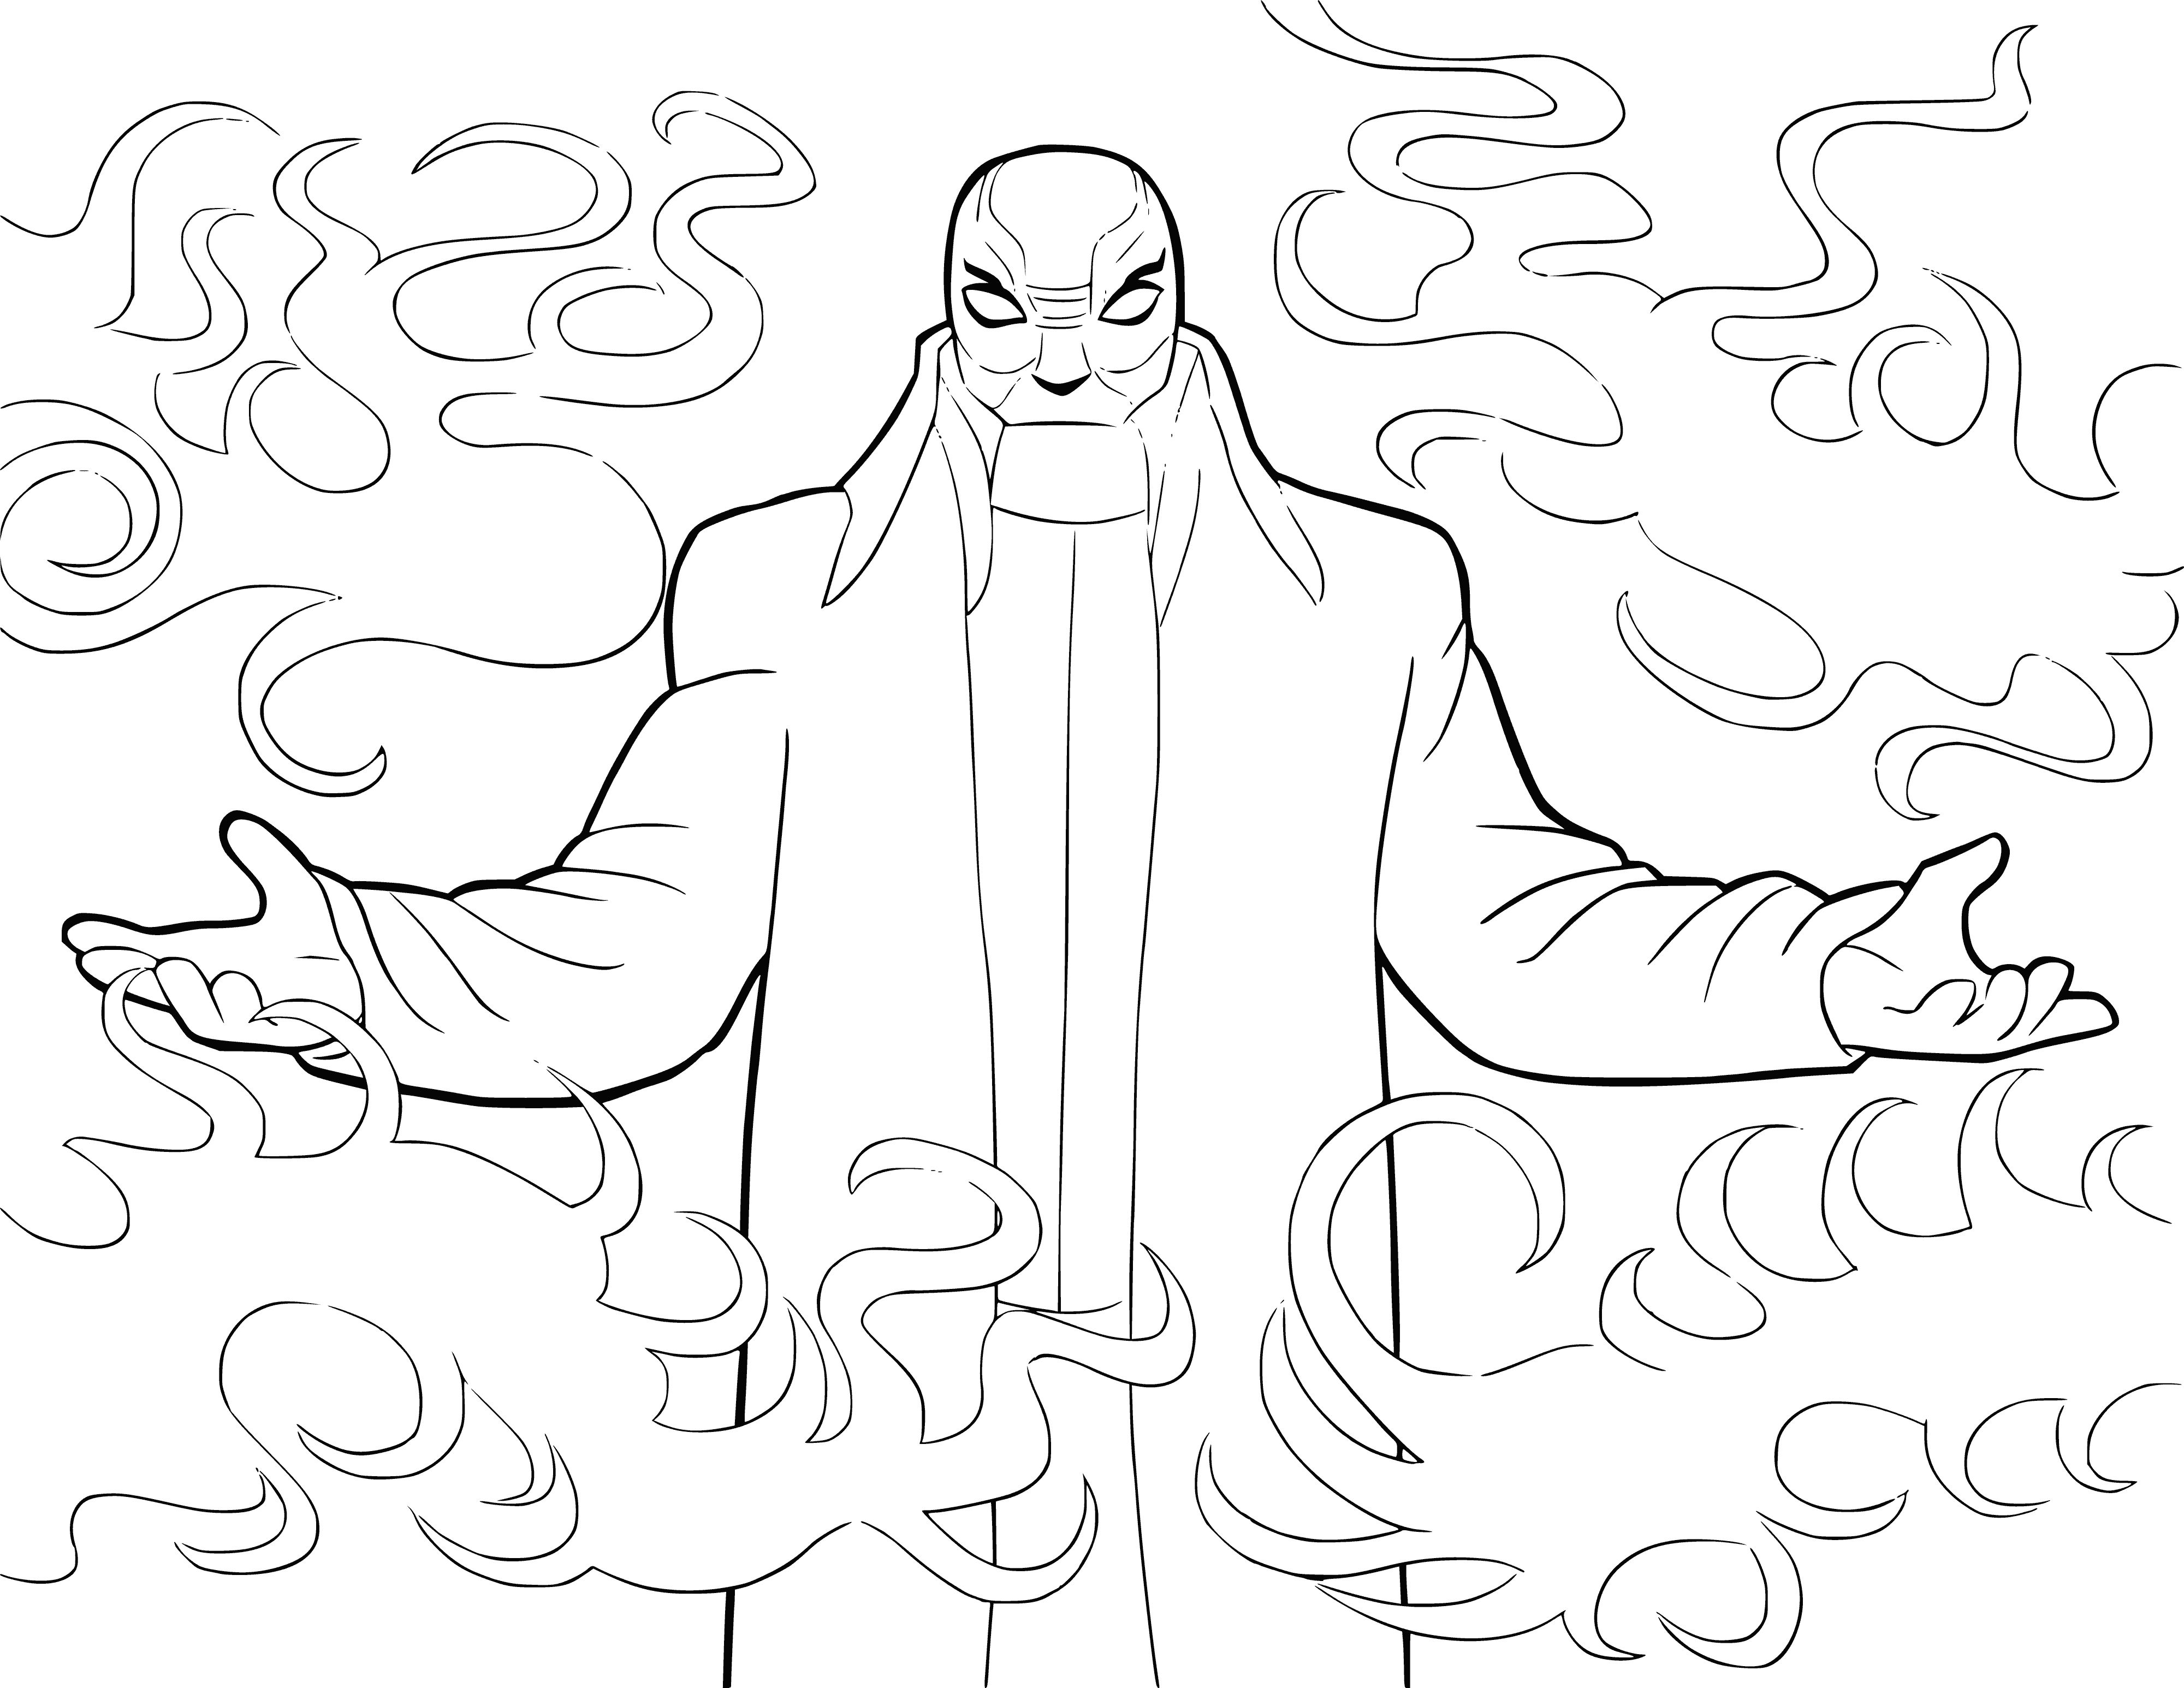 coloring page: Man with black clothes and cape stands in front of machine in coloring page.